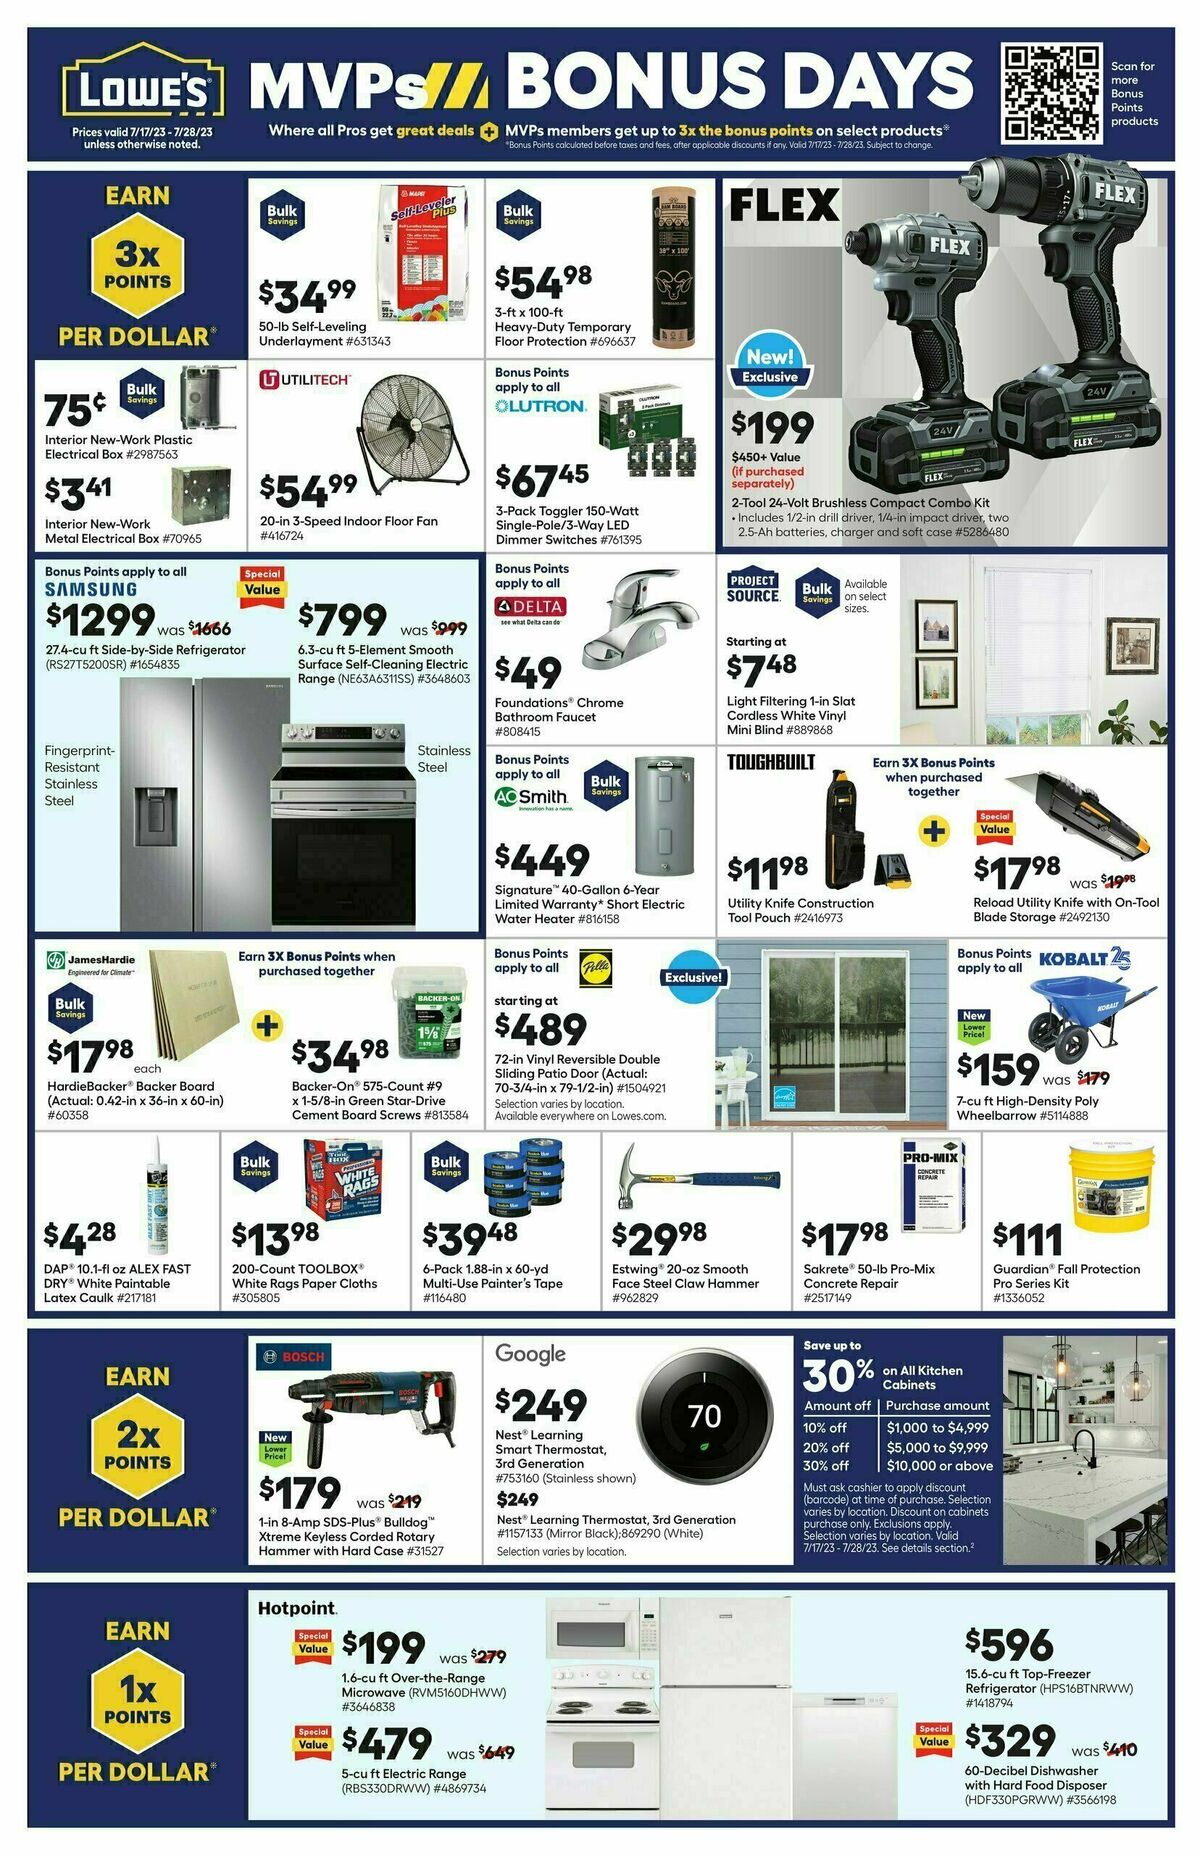 Lowe's Pro Weekly Ad from July 17